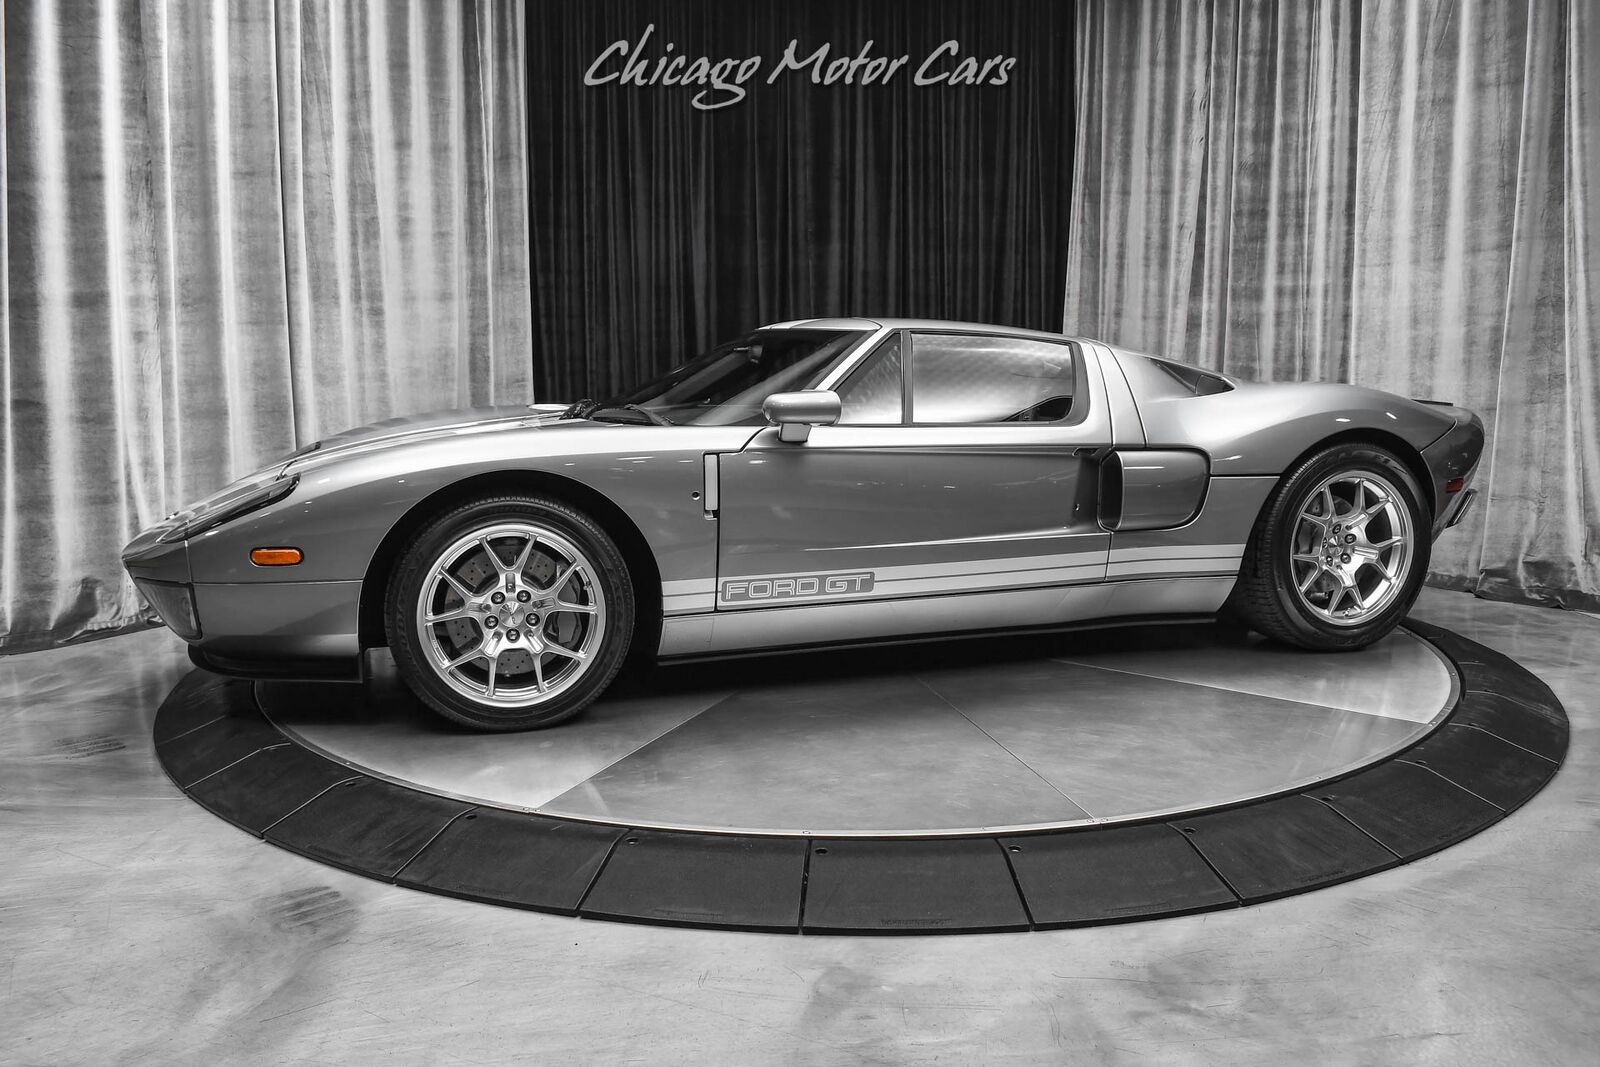 2006 Ford Ford Gt Coupe All 4 Options! Serviced! True Drivers Car! C